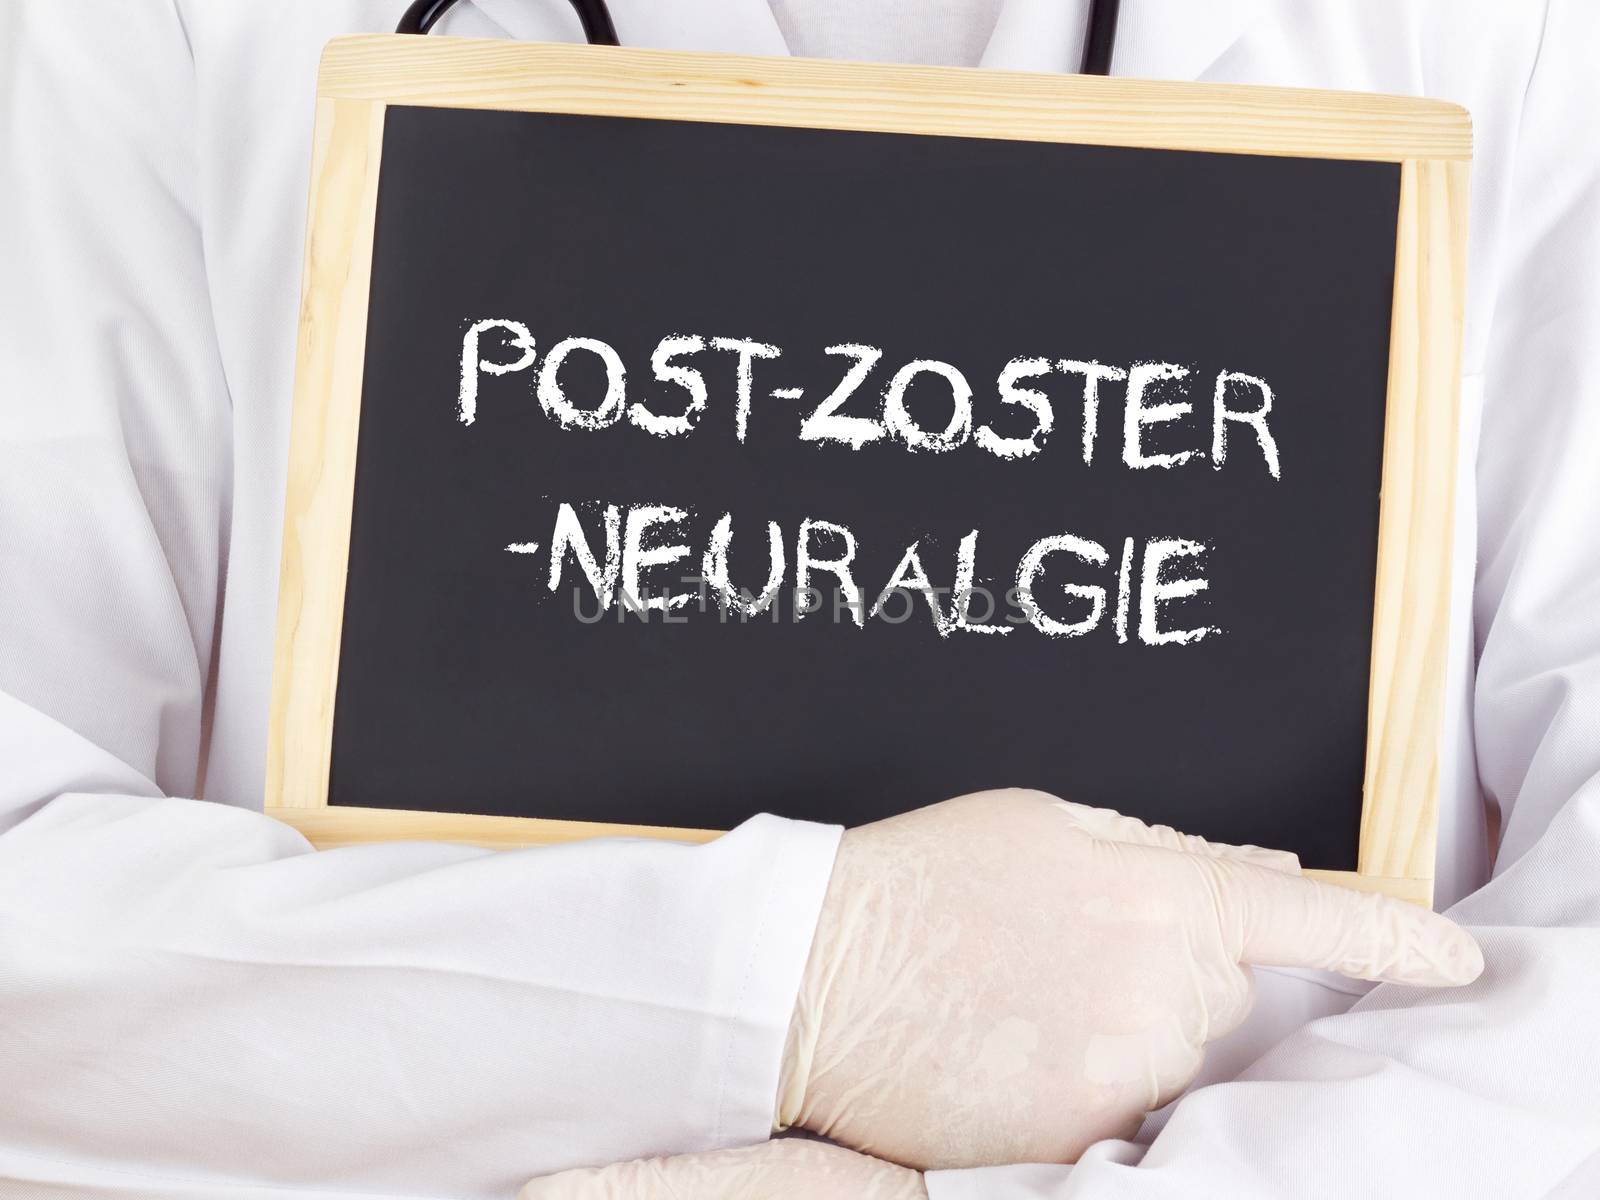 Doctor shows information: postherpetic neuralgia in german